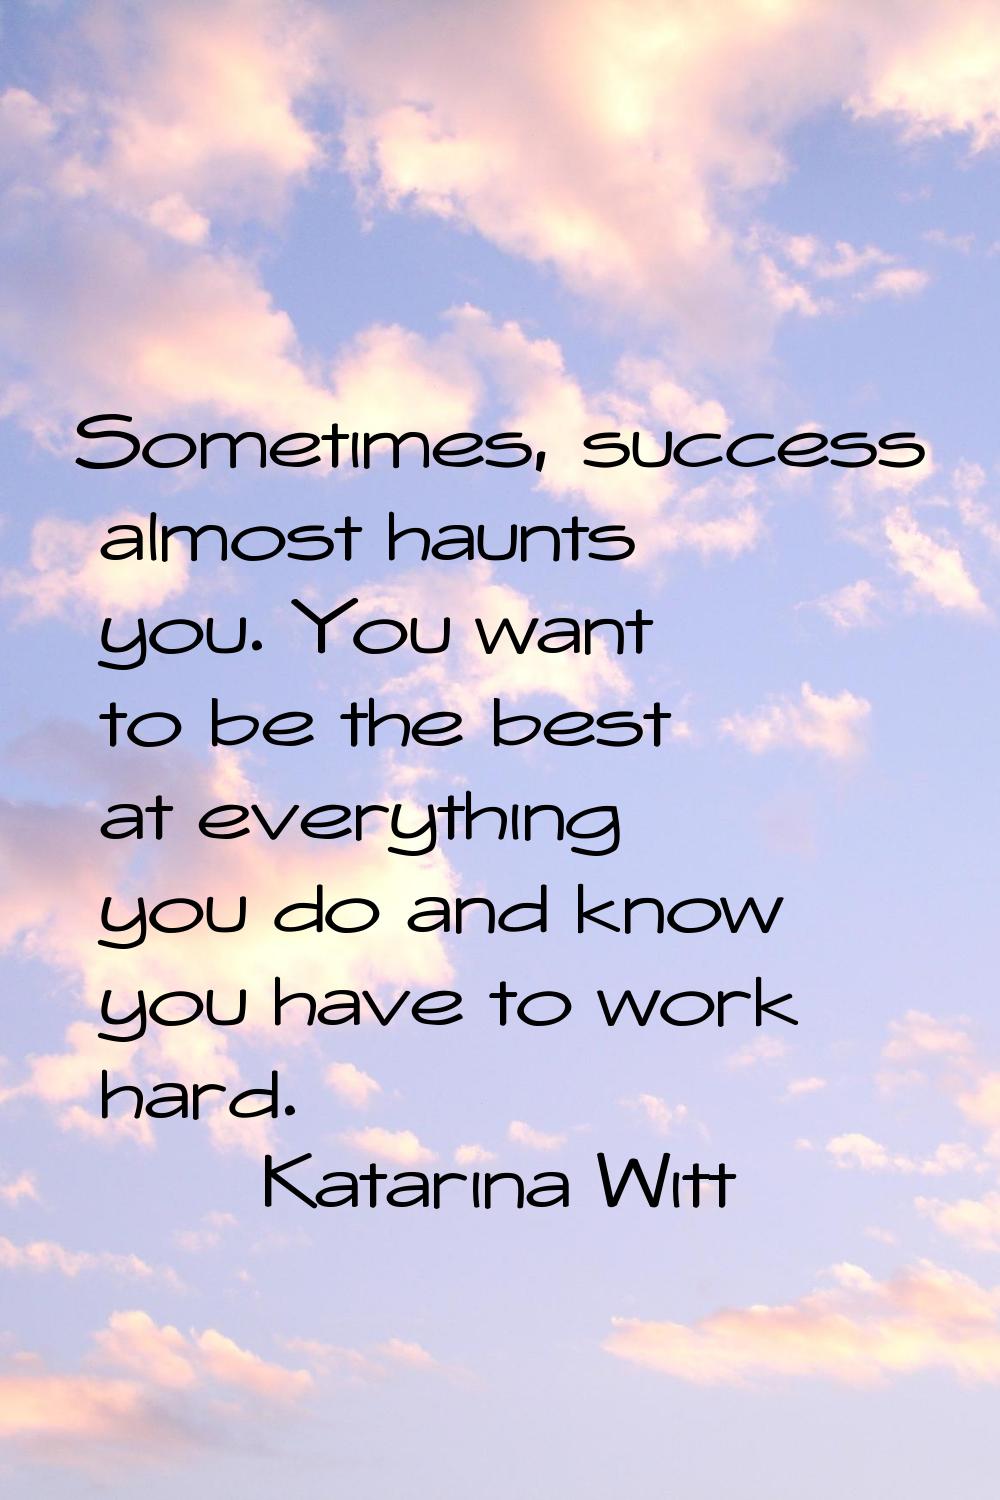 Sometimes, success almost haunts you. You want to be the best at everything you do and know you hav